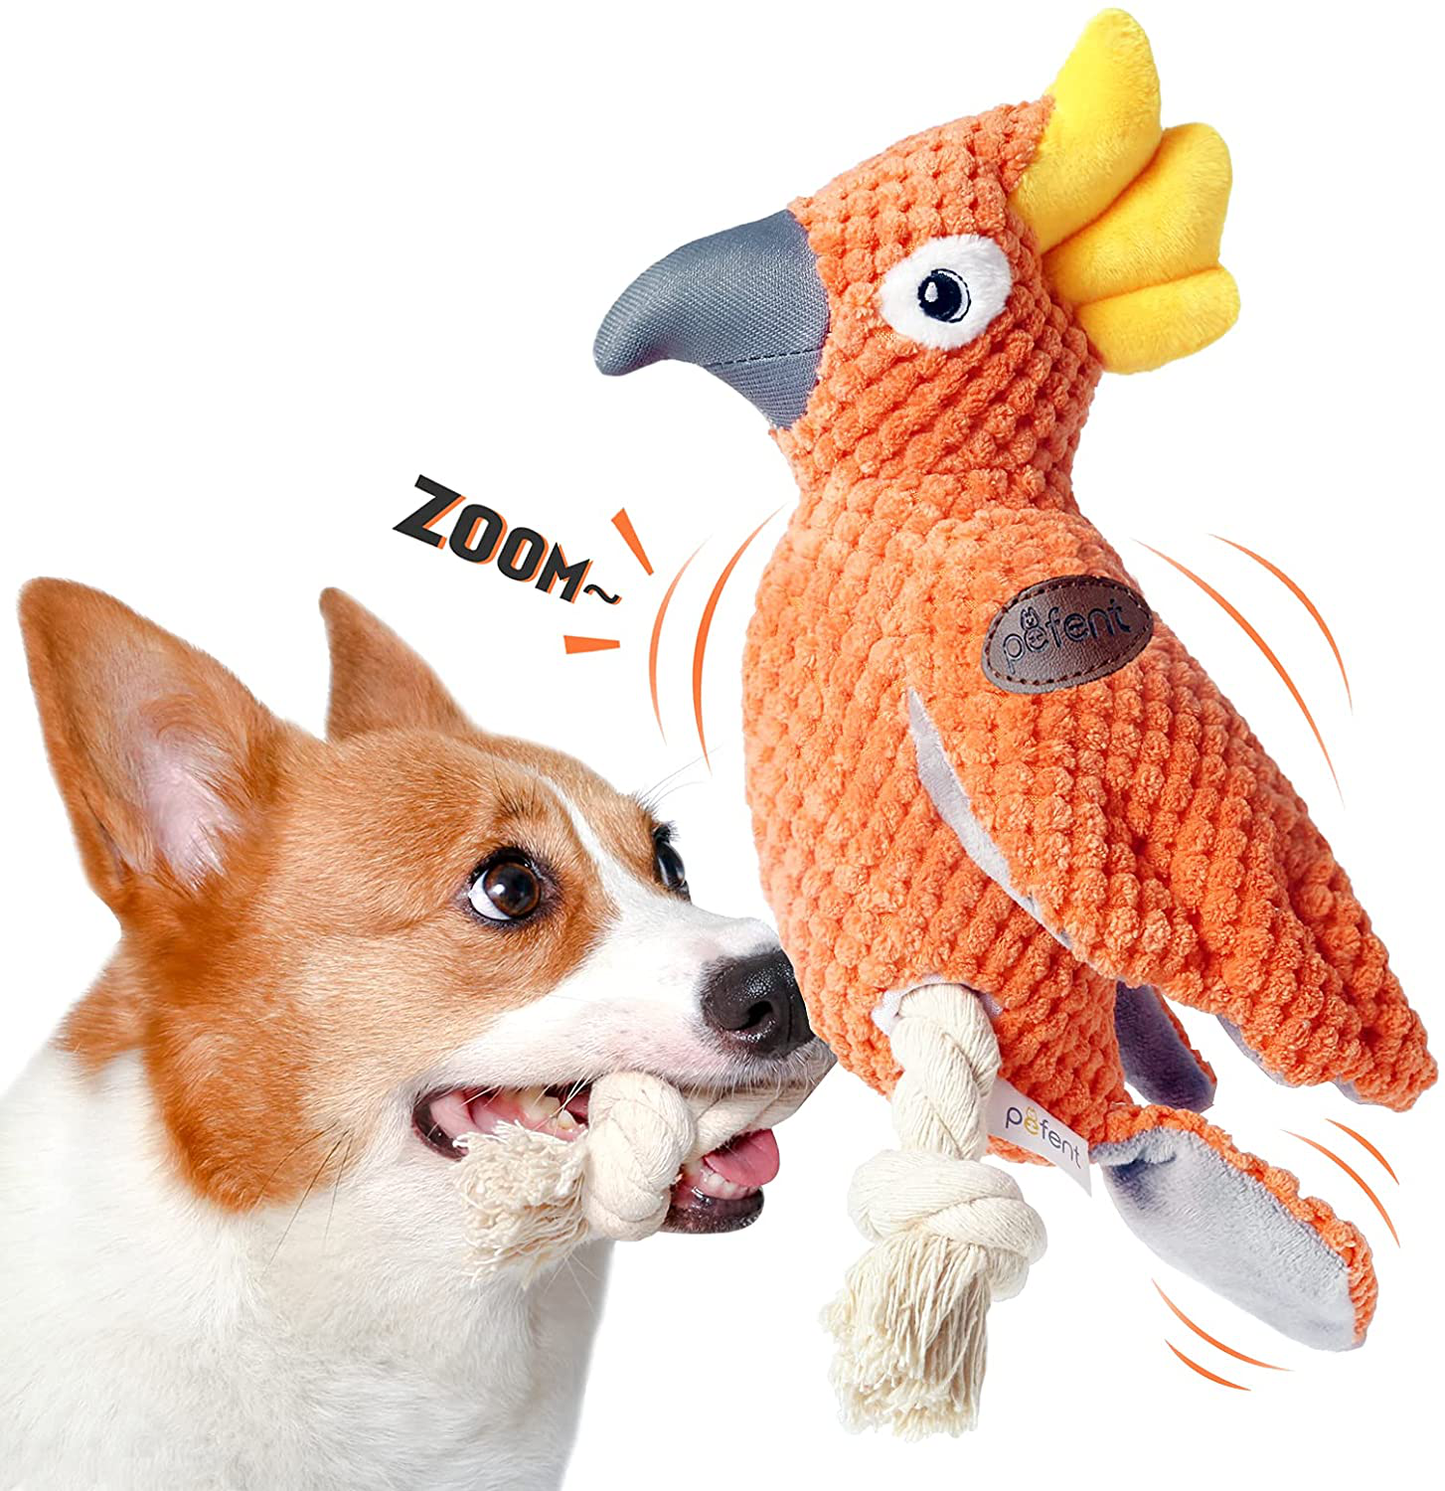 Dog Toys for Small Dog, Plush Interactive Dog Squeak Toy for Puppies, Durable Dog Chew Toy with Stuffed and Crinkle Paper to Clean Teeth for Medium Dogs Animals & Pet Supplies > Pet Supplies > Dog Supplies > Dog Toys Pefent Orange  